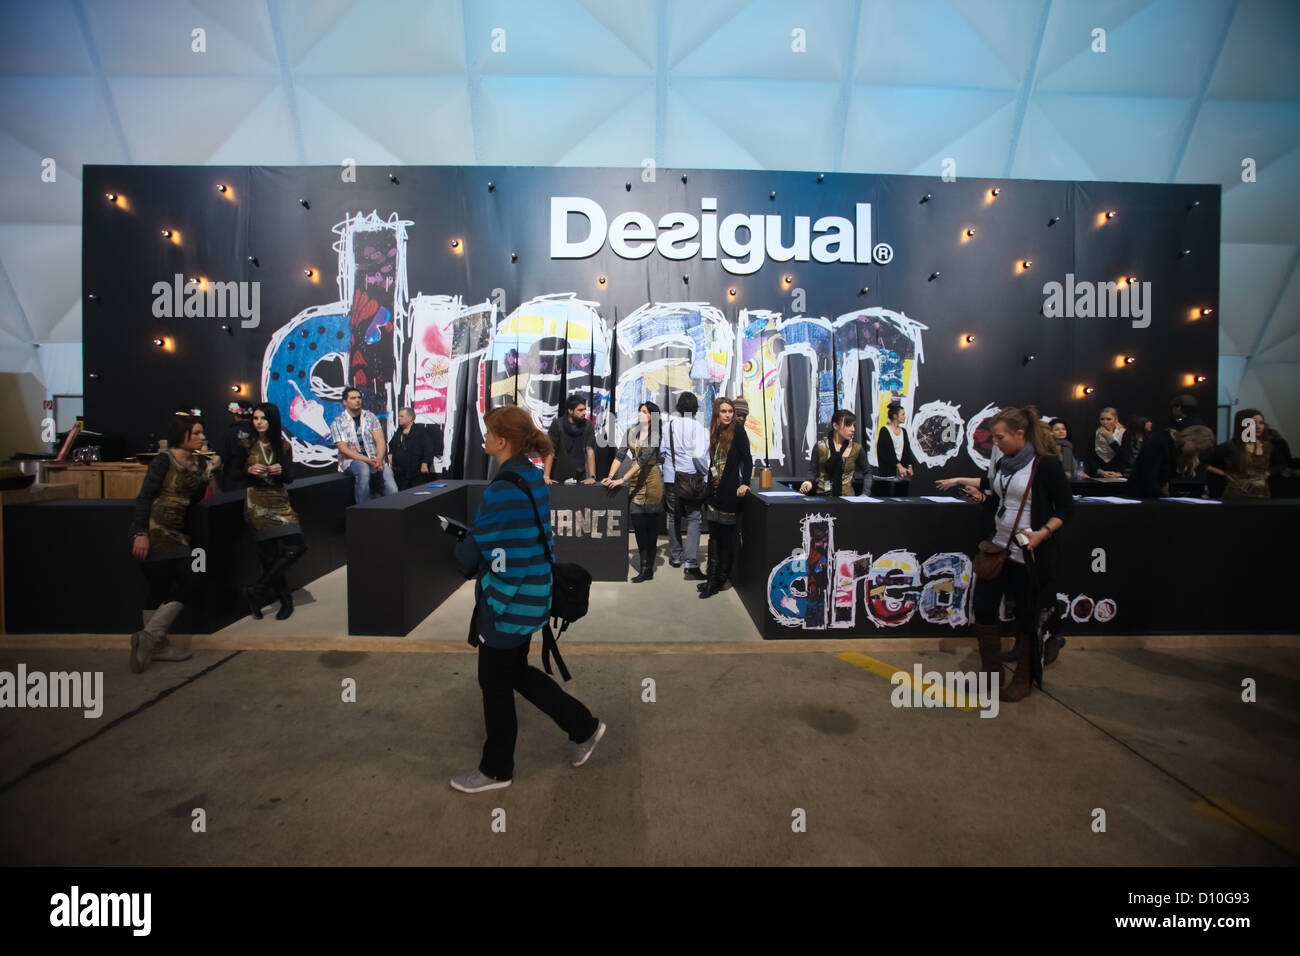 BERLIN - JANUARY 21: Desigual stand at Bread & Butter fair on January 21, 2011 in Berlin, Germany Stock Photo